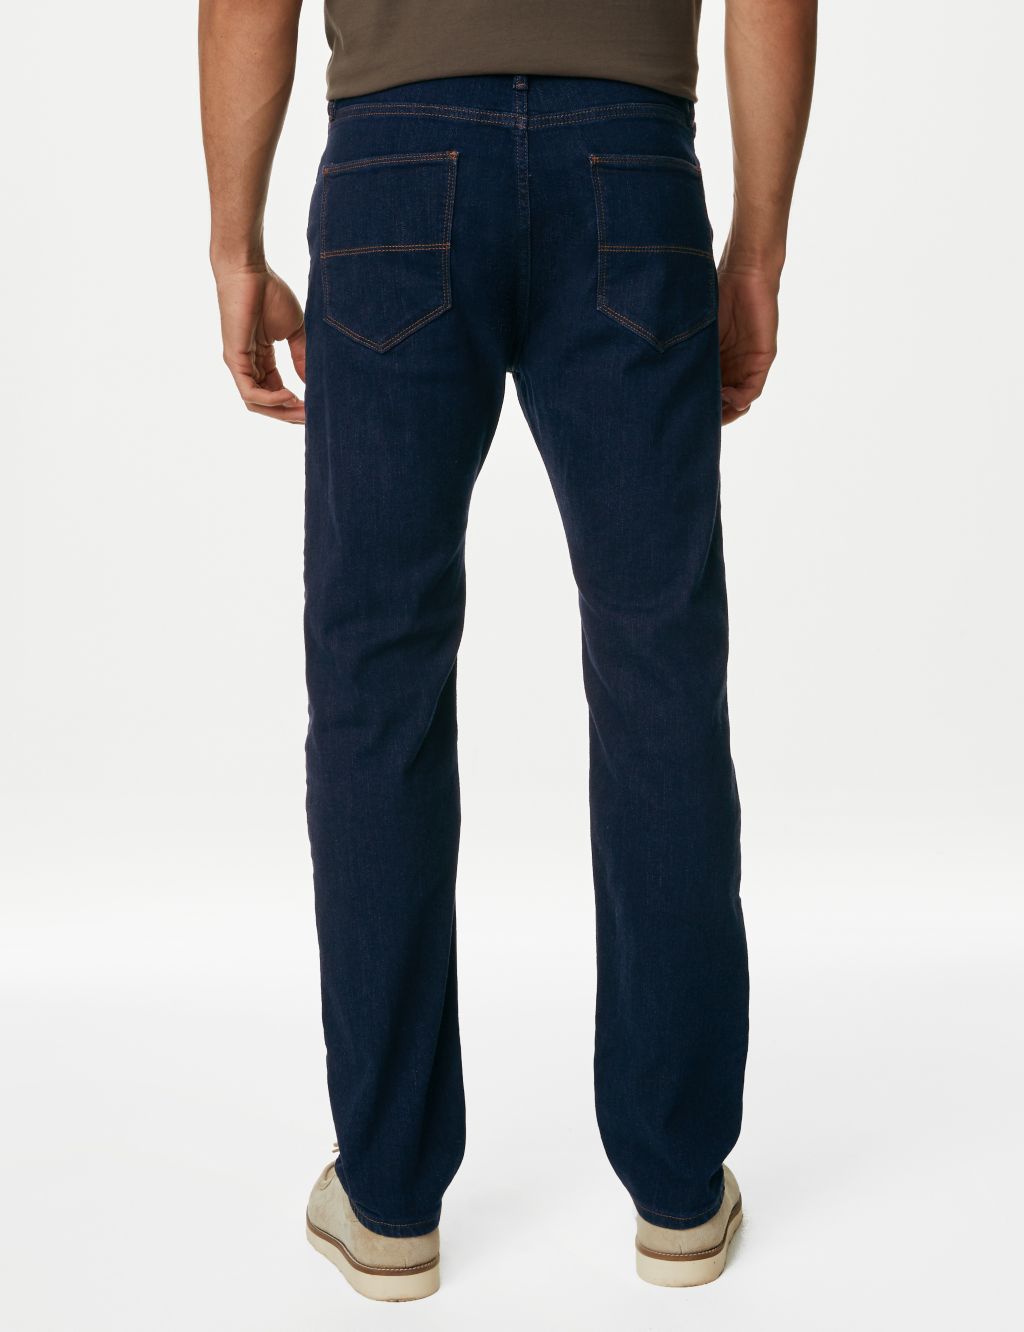 Straight Fit Stretch Jeans image 4